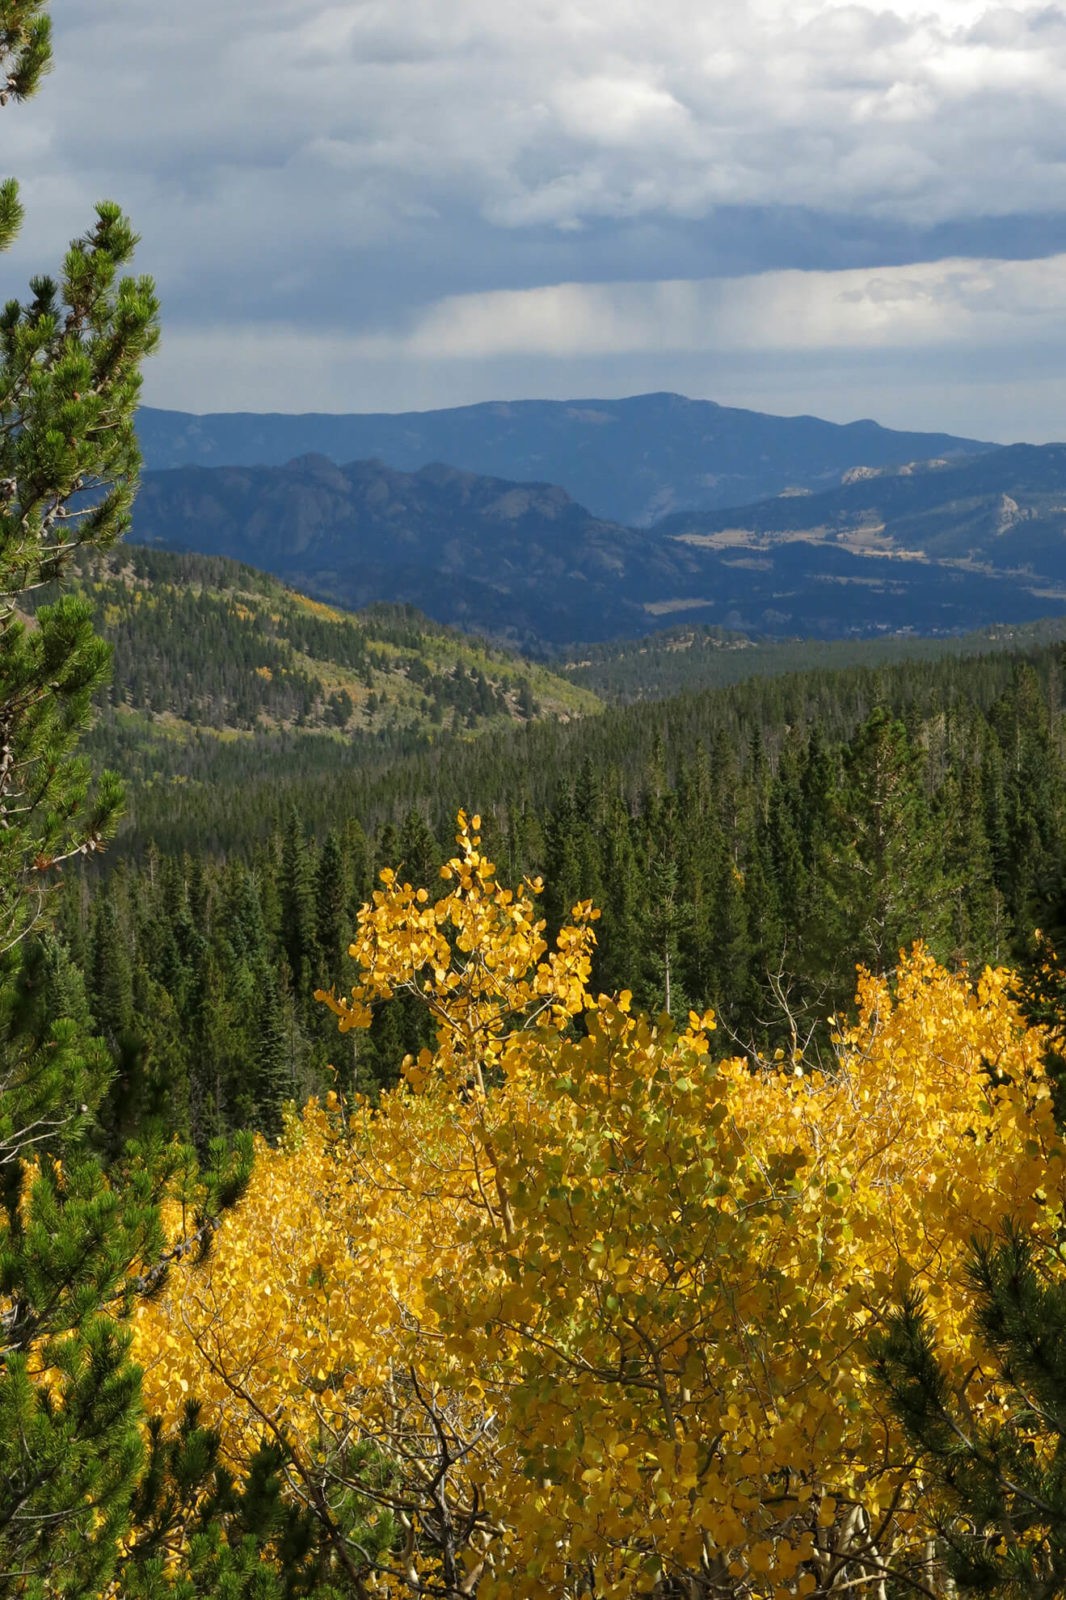 Robin Botie of Ithaca, New York, photographs the aspens turning yellow in the Rocky Mountains.